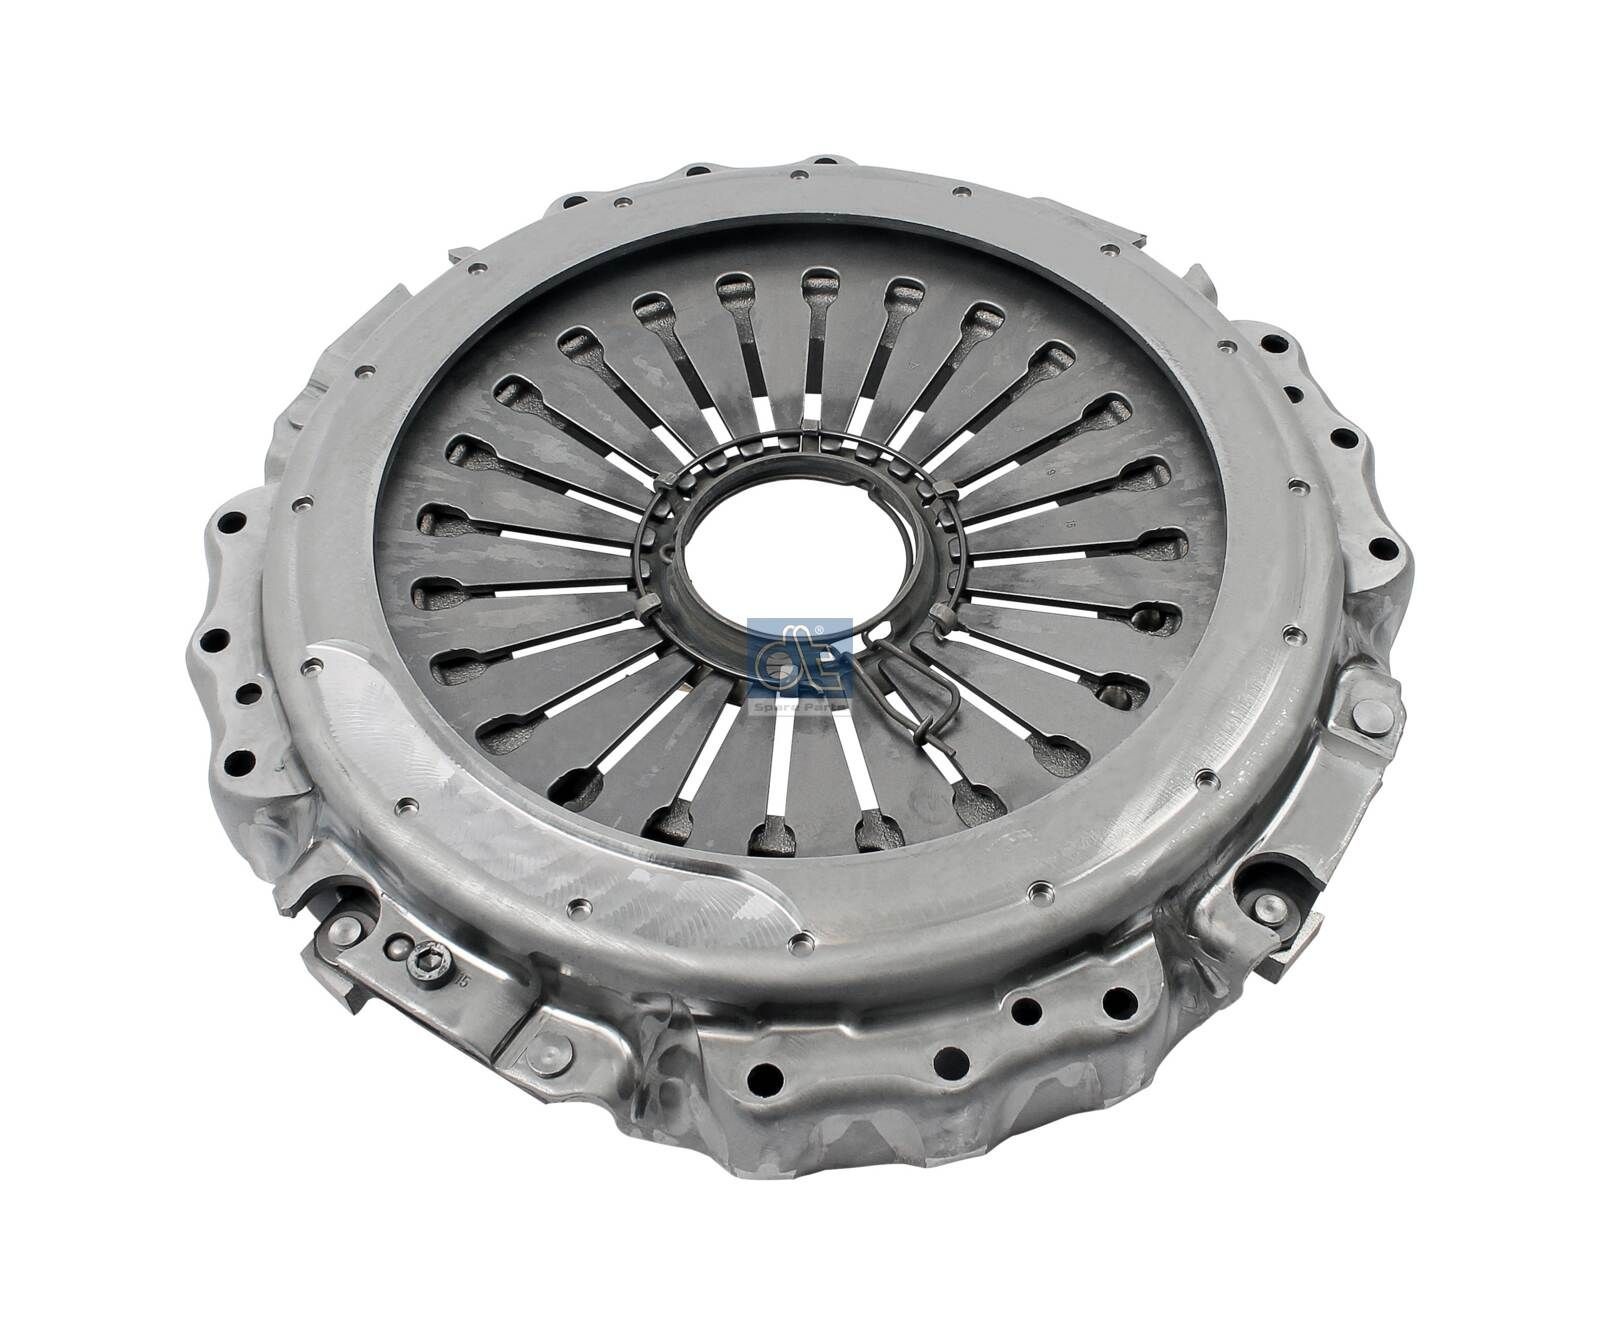 3482 000 042 DT Spare Parts 3.40133 Clutch Pressure Plate 007 250 62 04